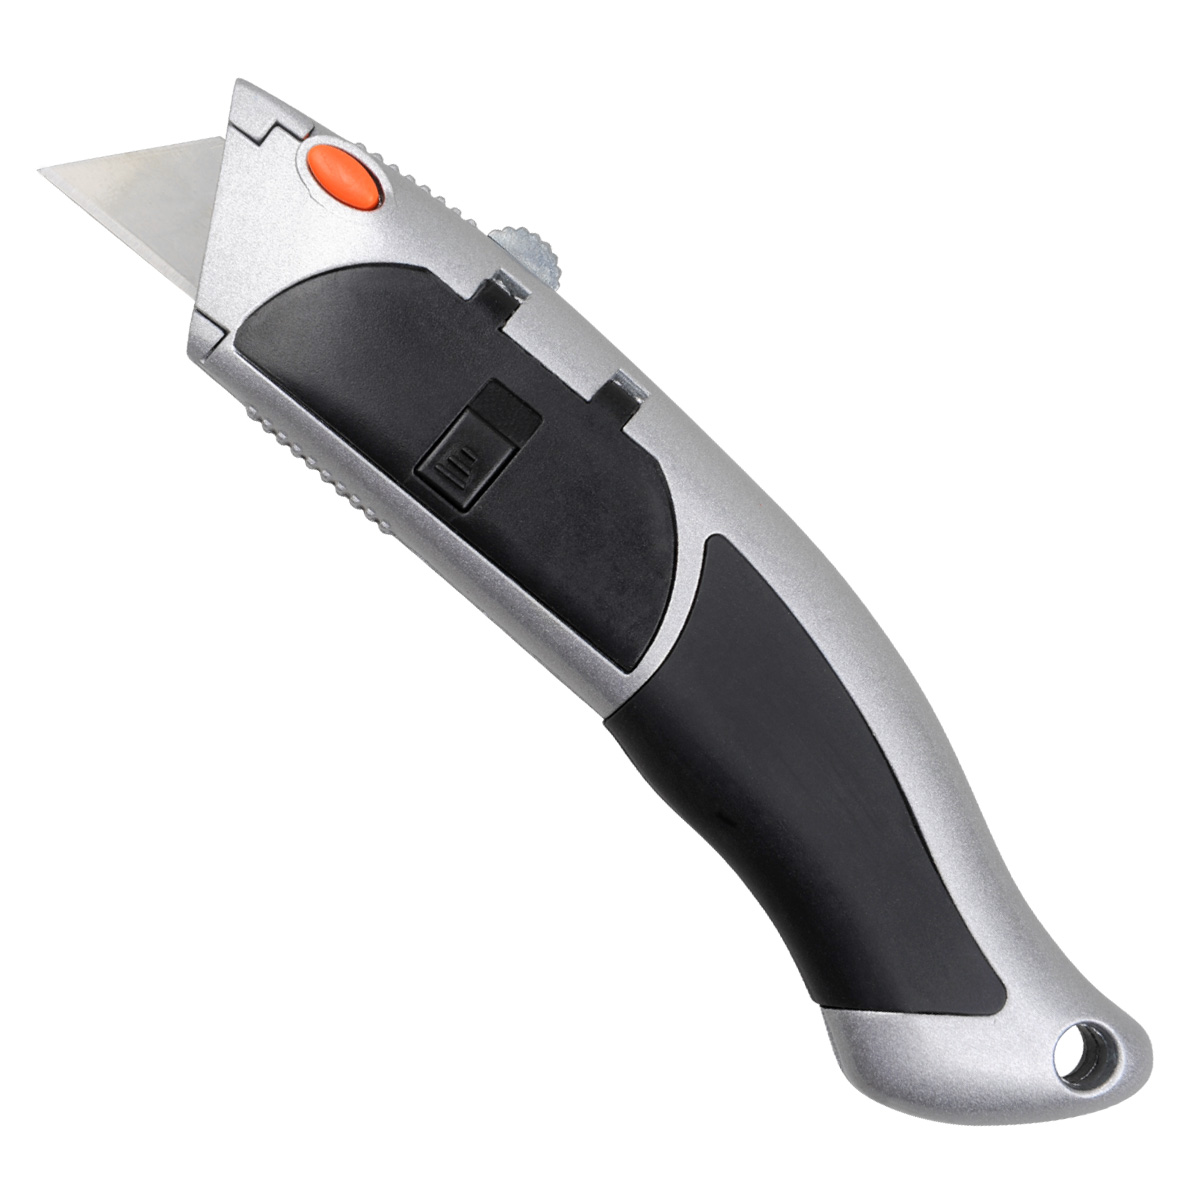 AUTO-RELOAD UTILITY KNIFE